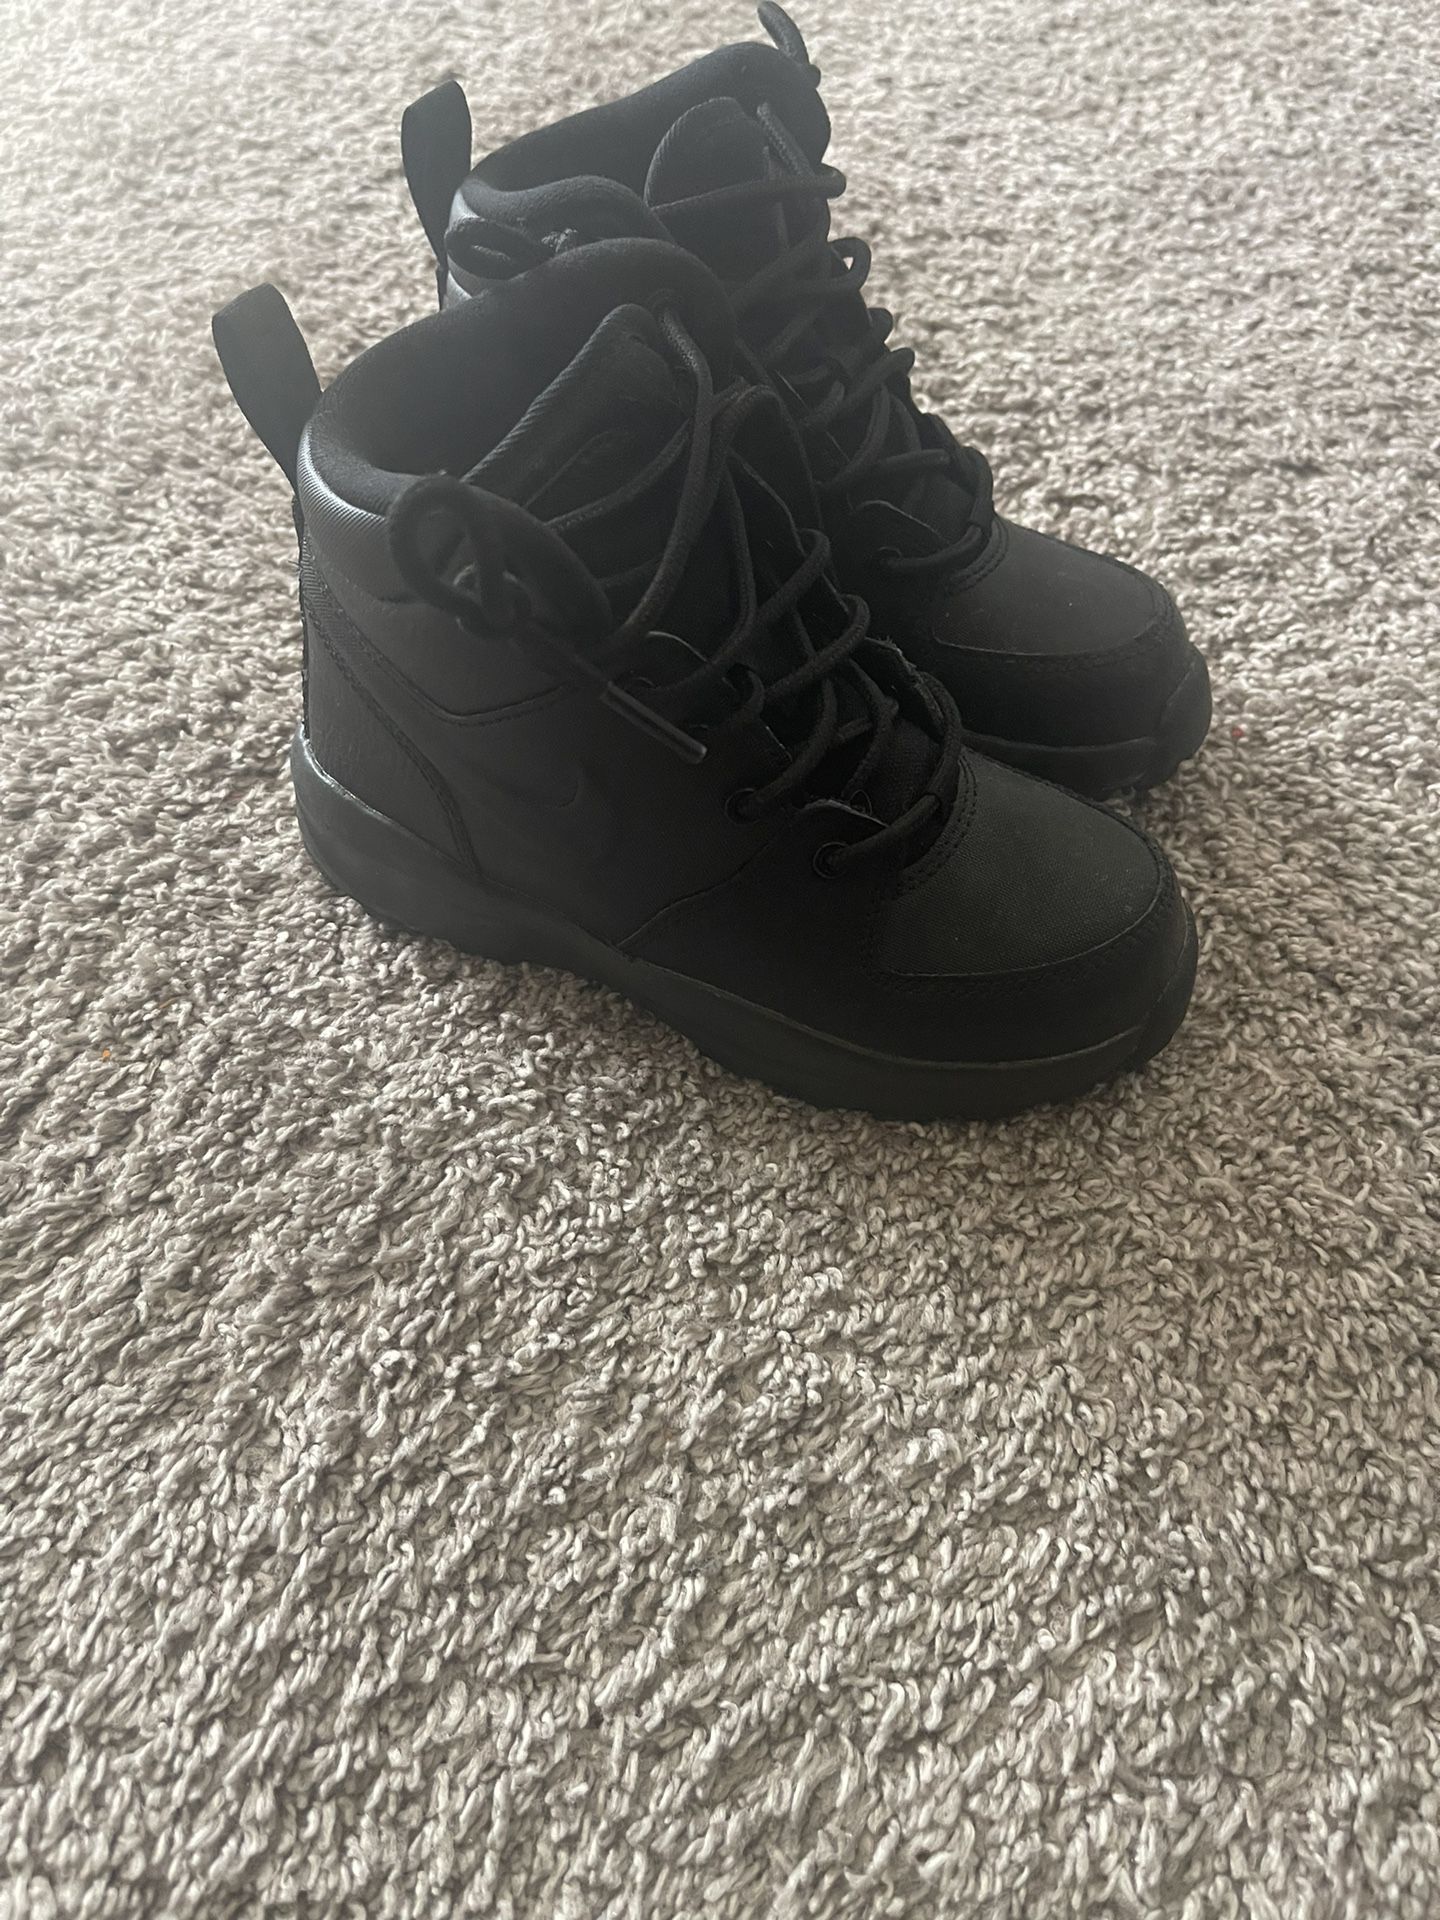 Toddler Nike Boots